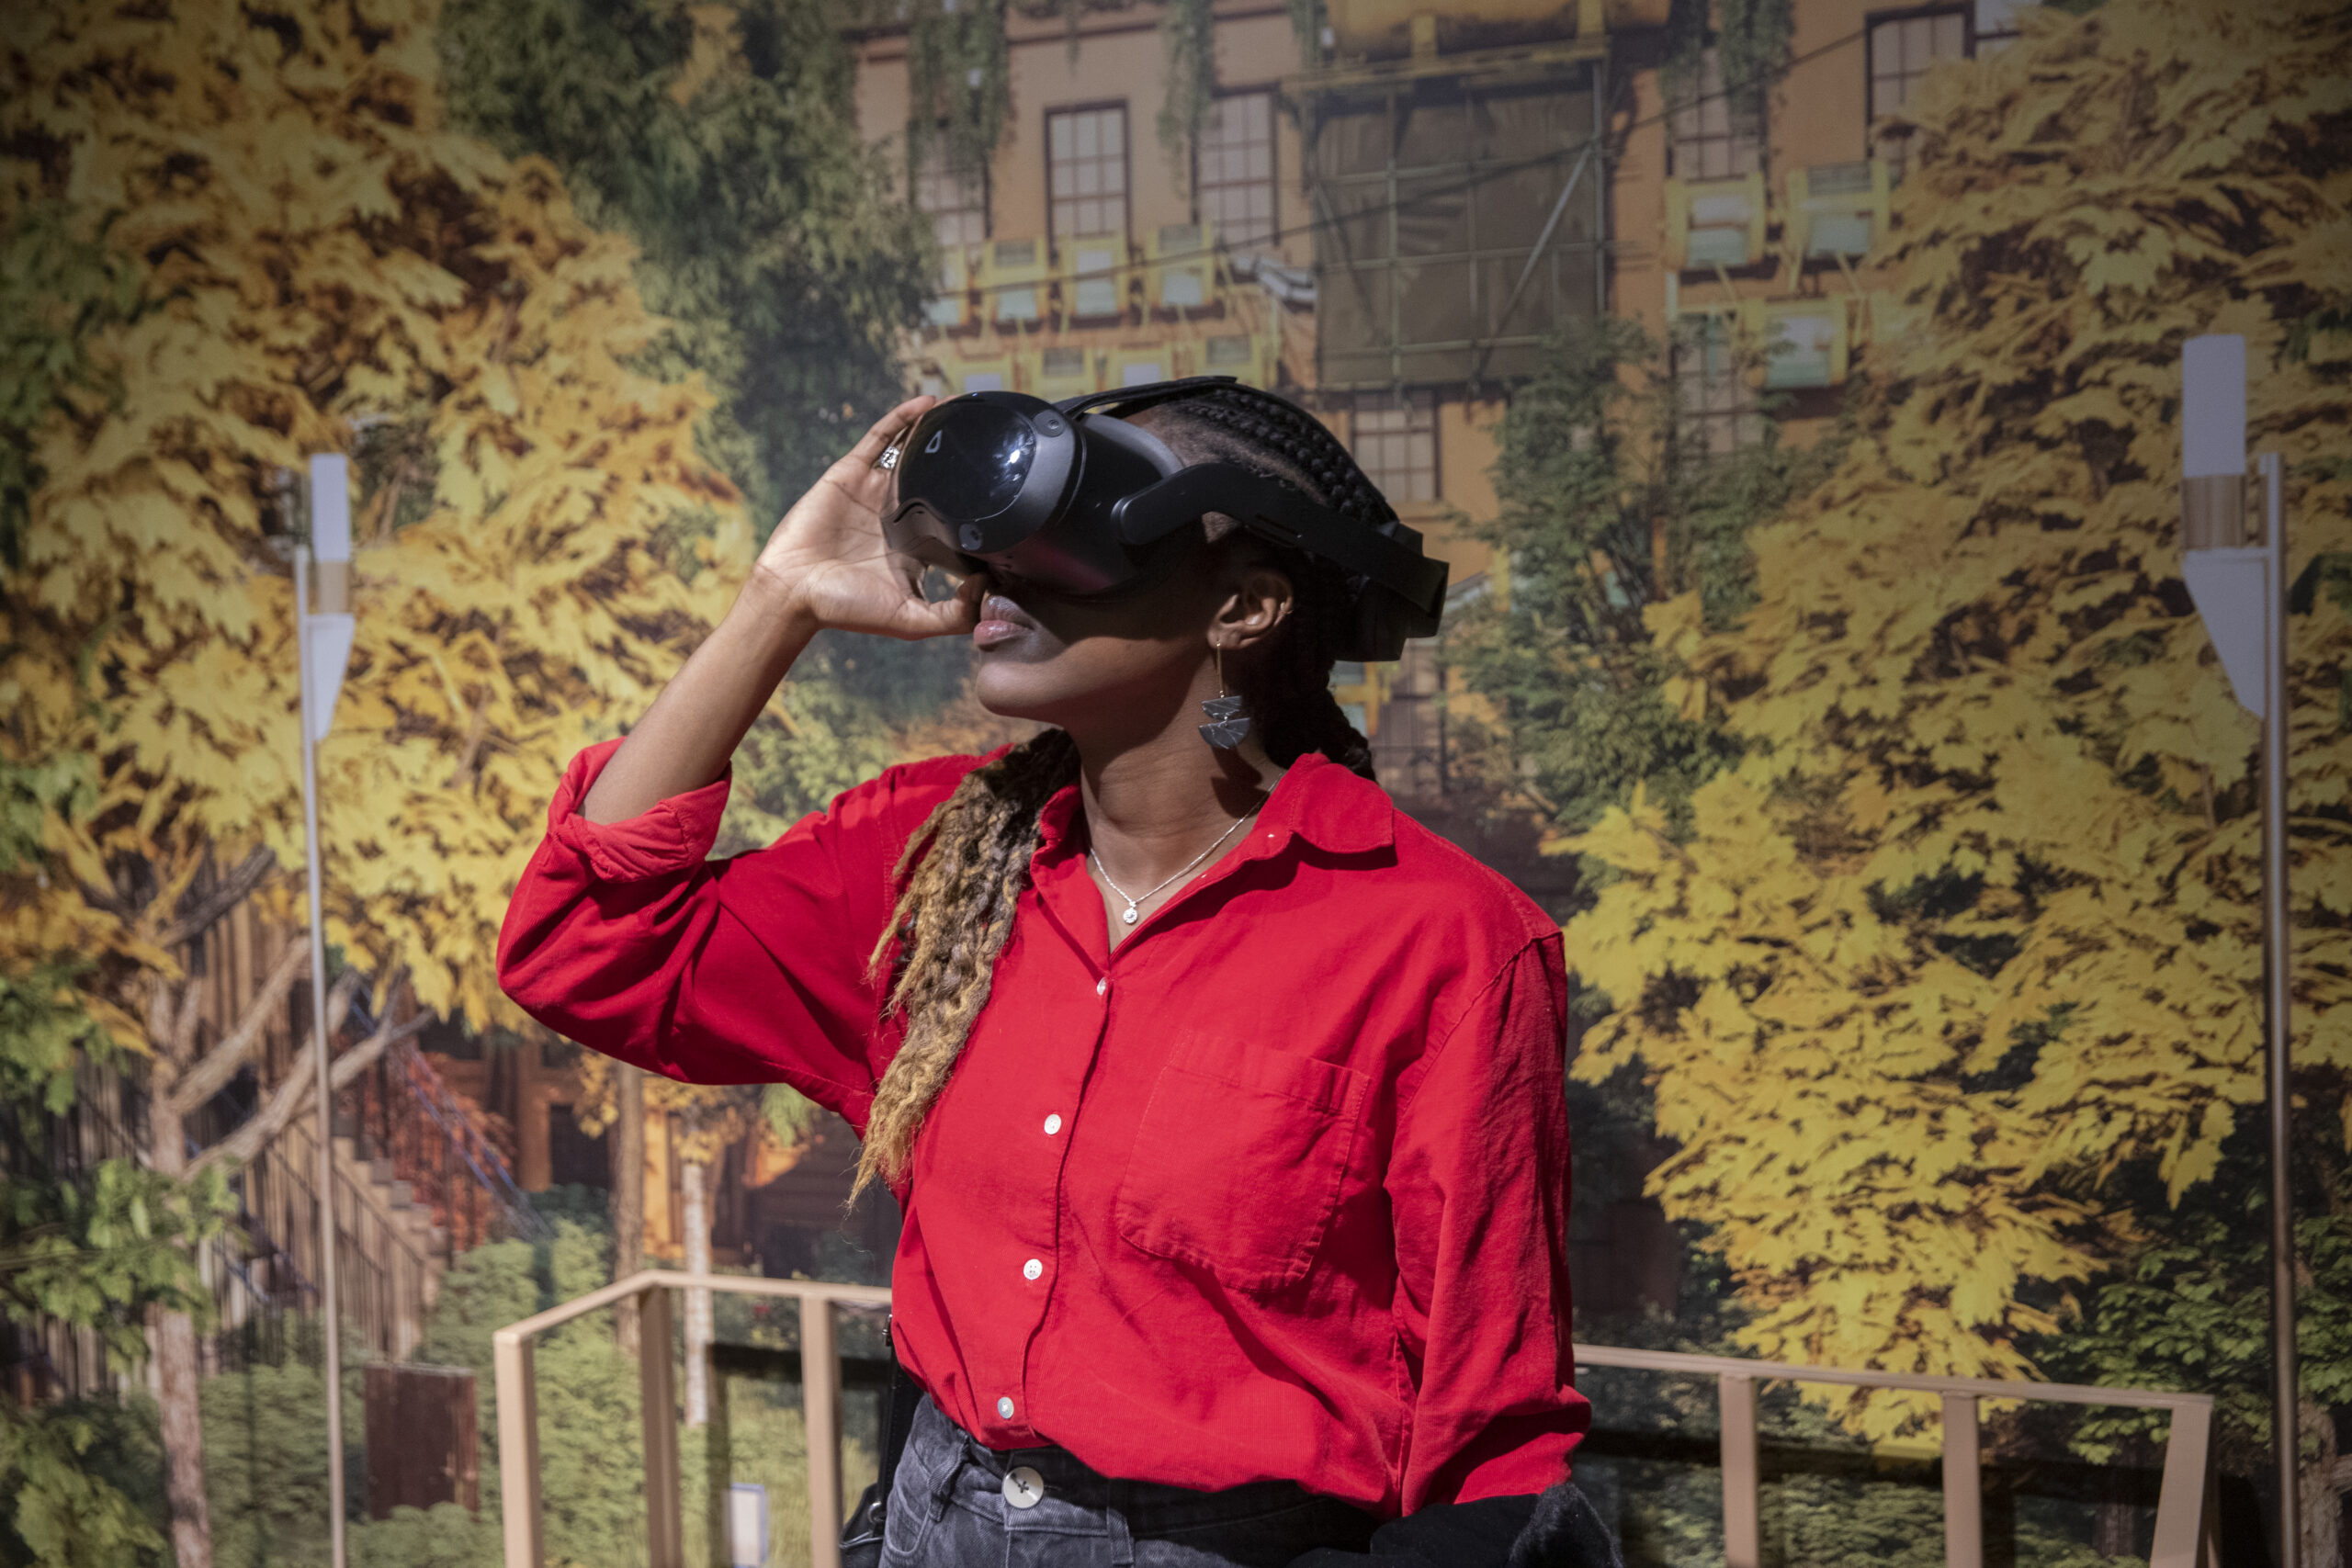 Adedoyin Olagbegi takes part in the VR portion of the exhibit at Climate Futurism panel.